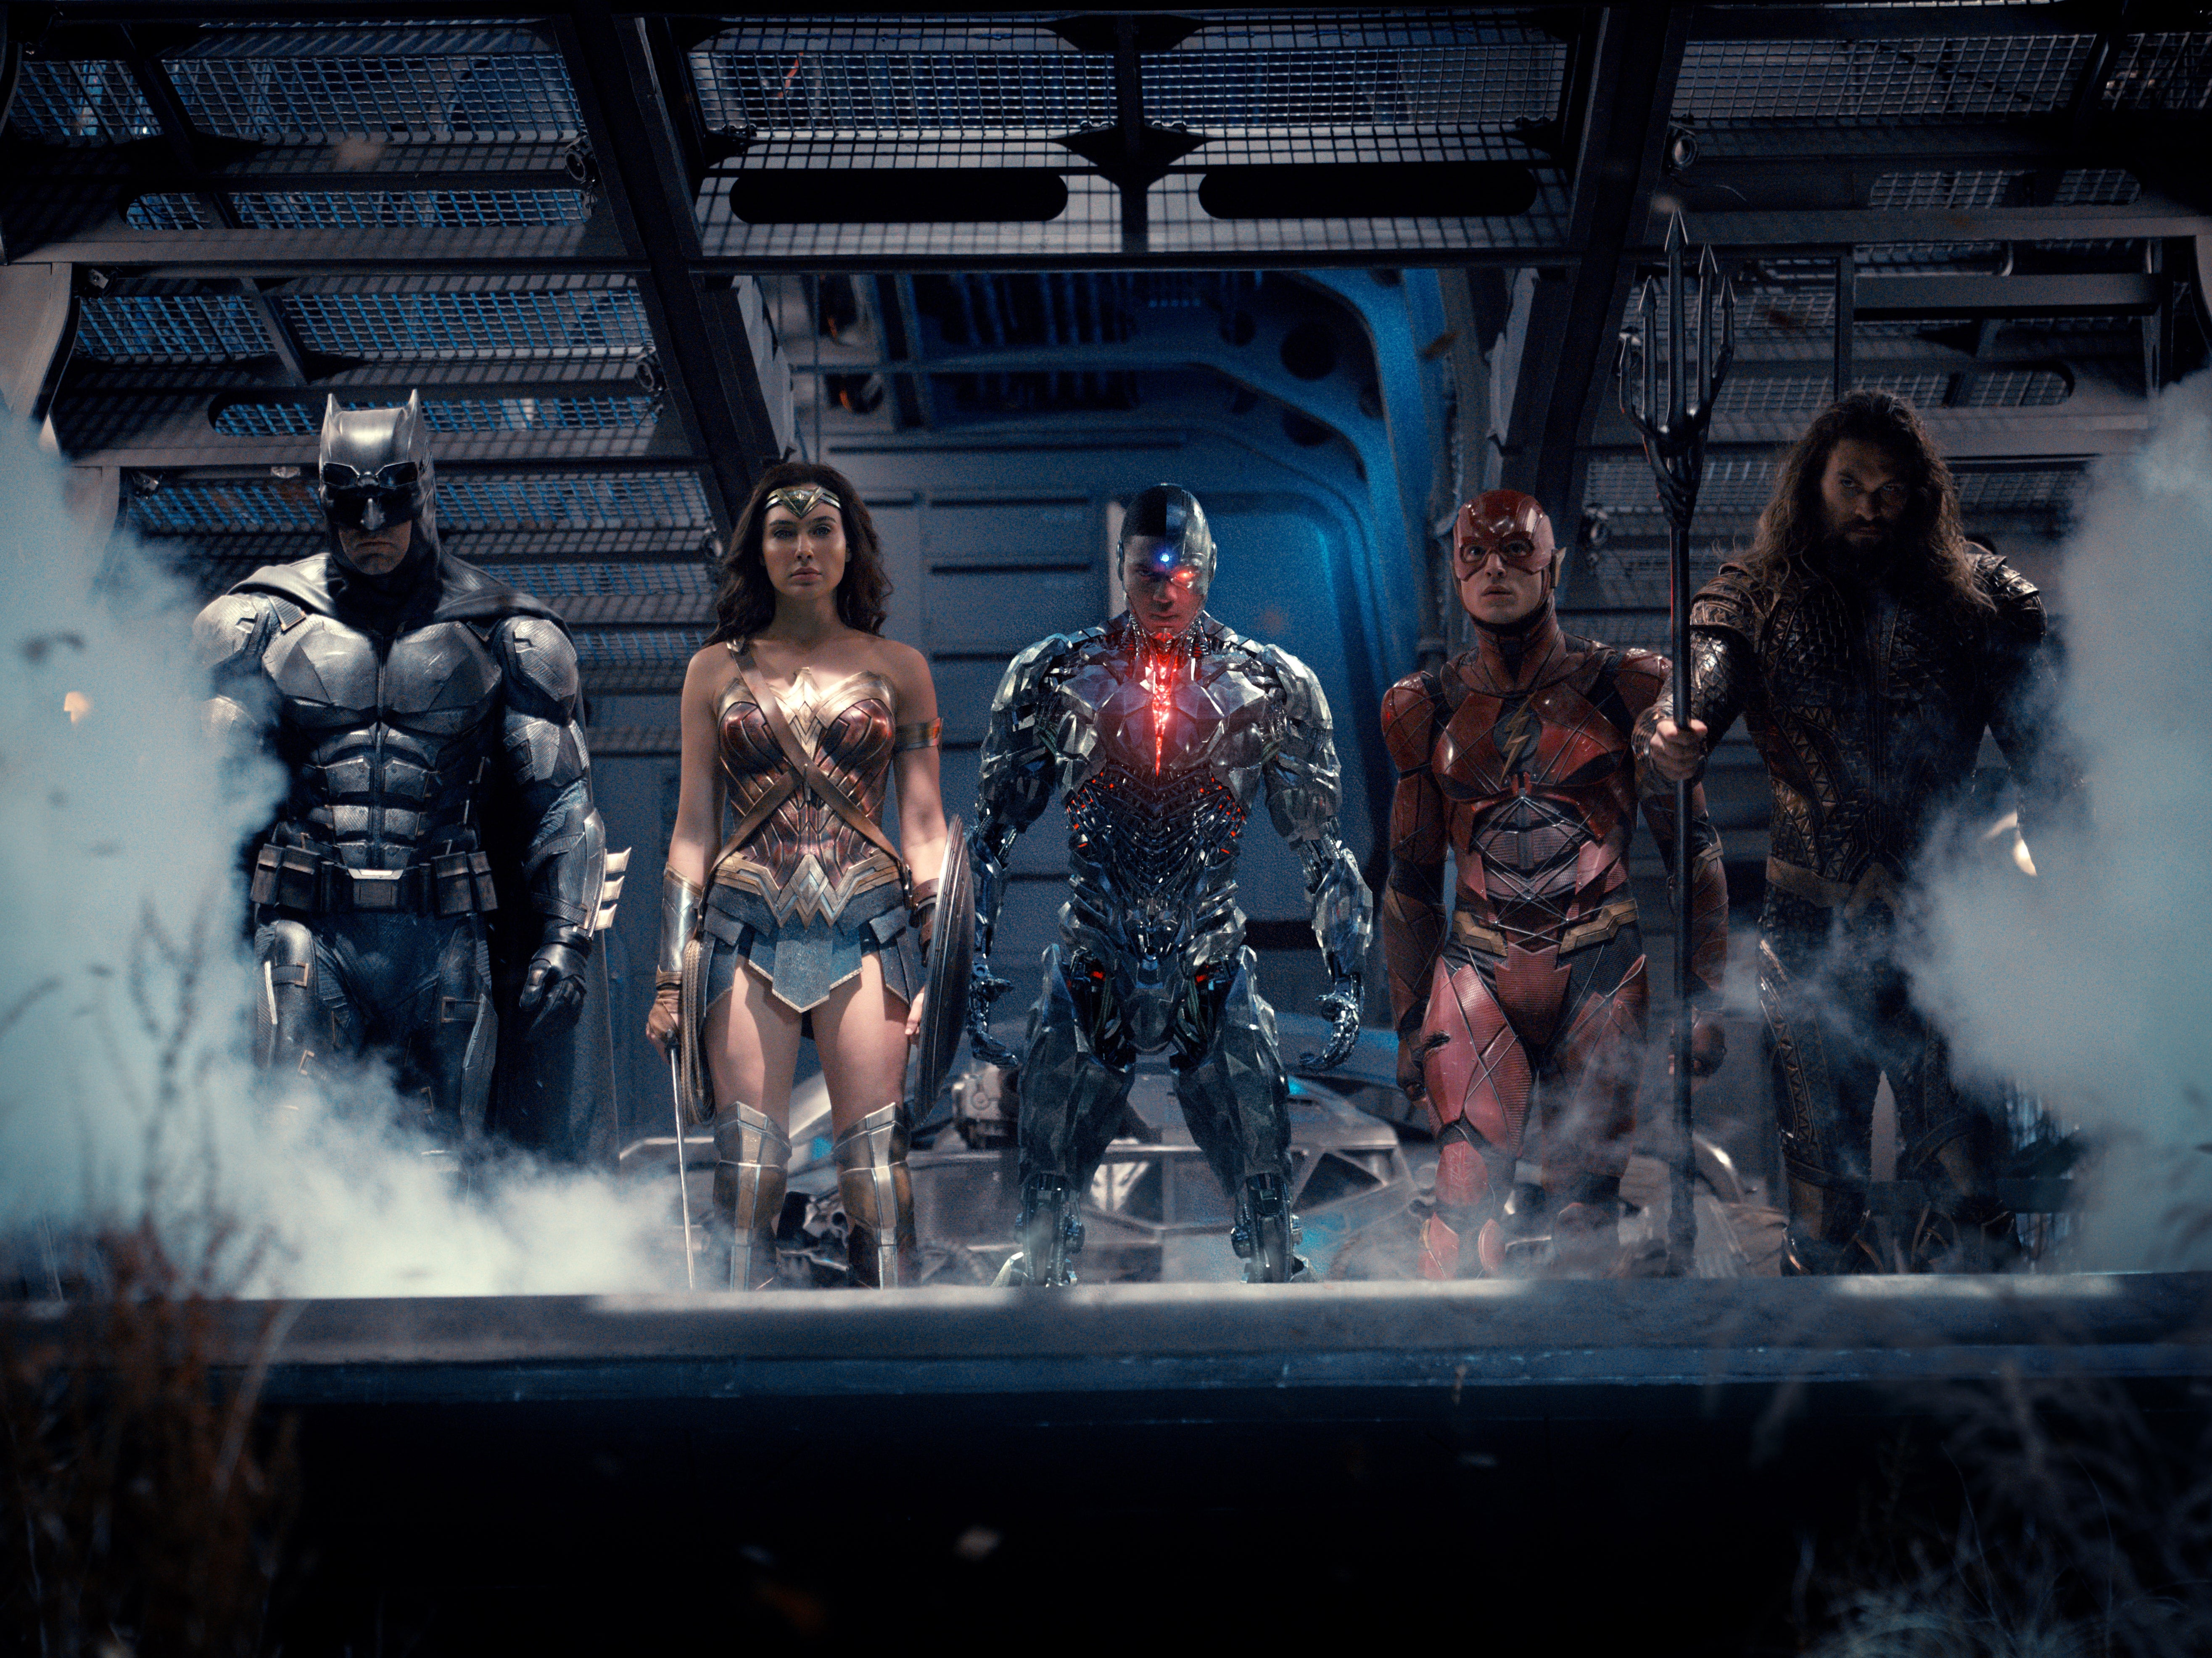 Zack Snyder’s cut of ‘Justice League’ is more than four hours long